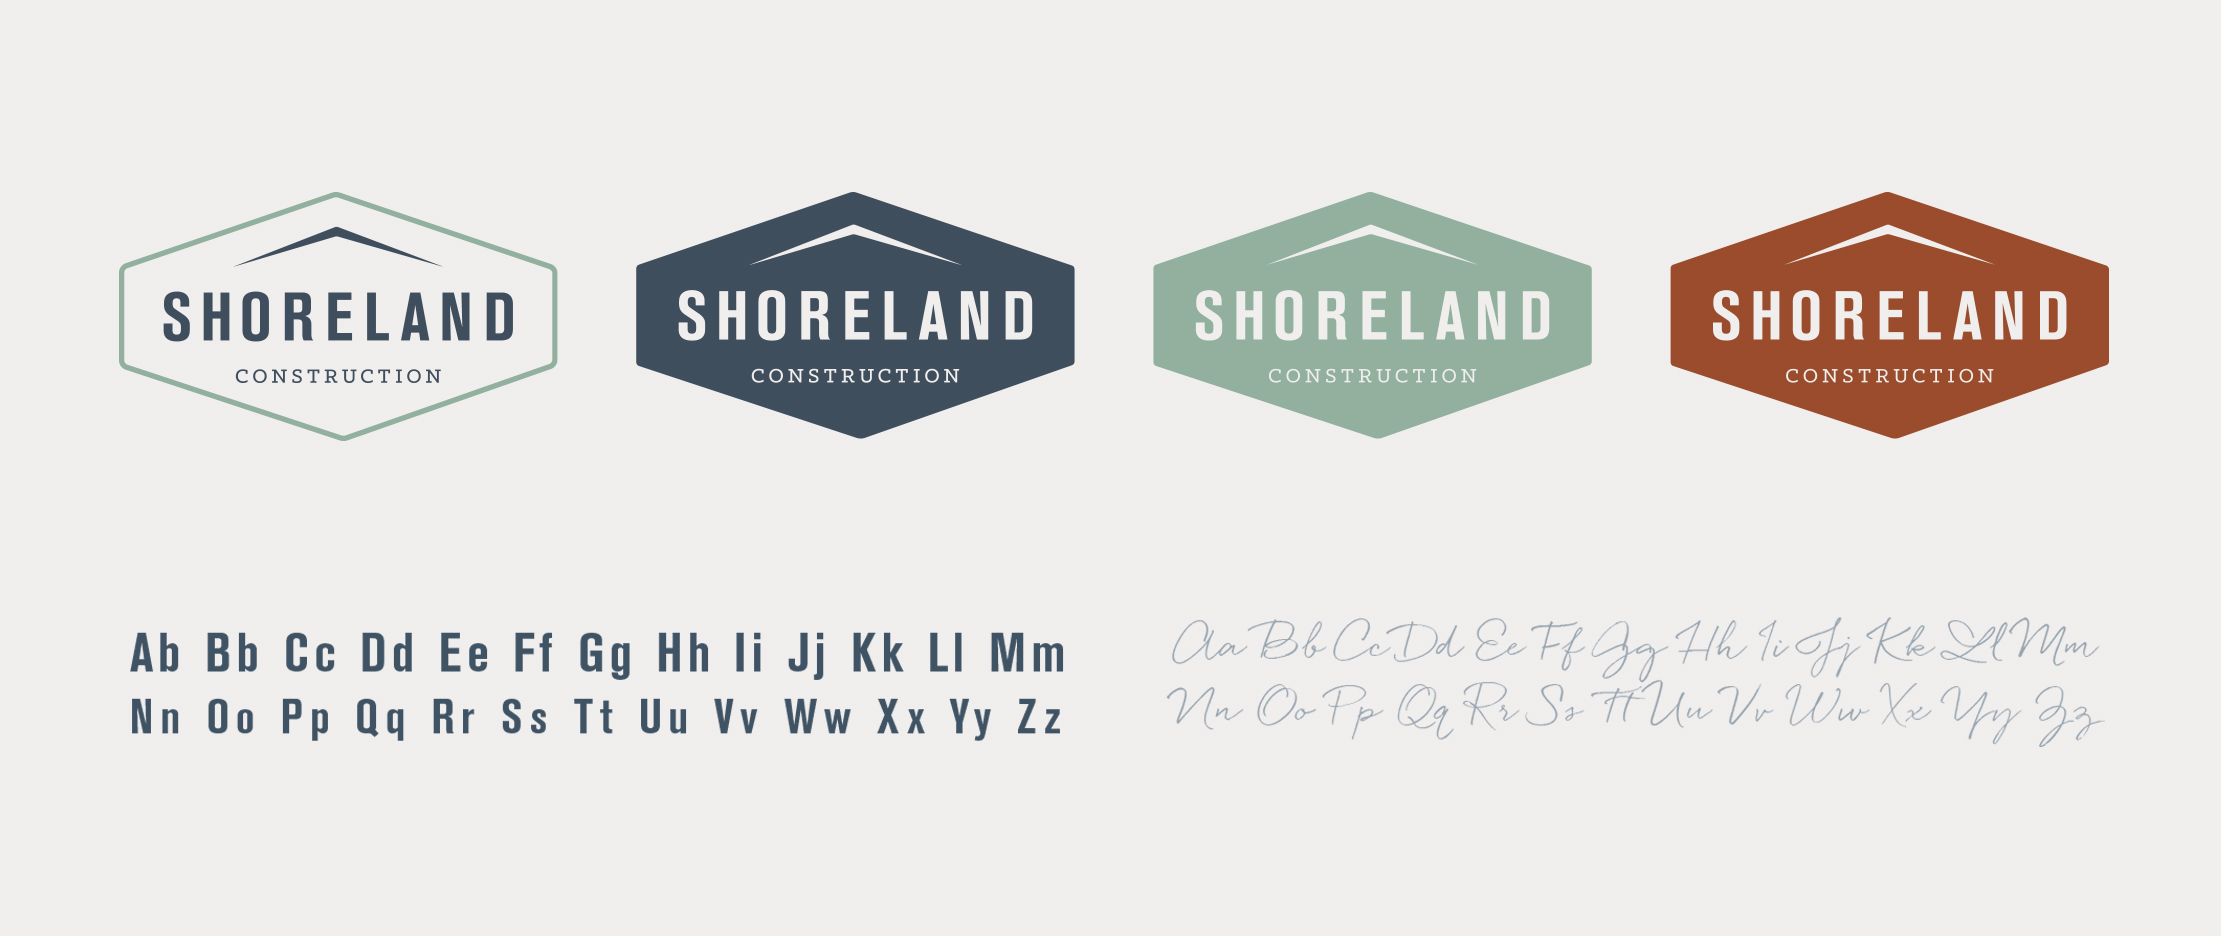 Shoreland Construction Brand Badges Designed by Just Make Things